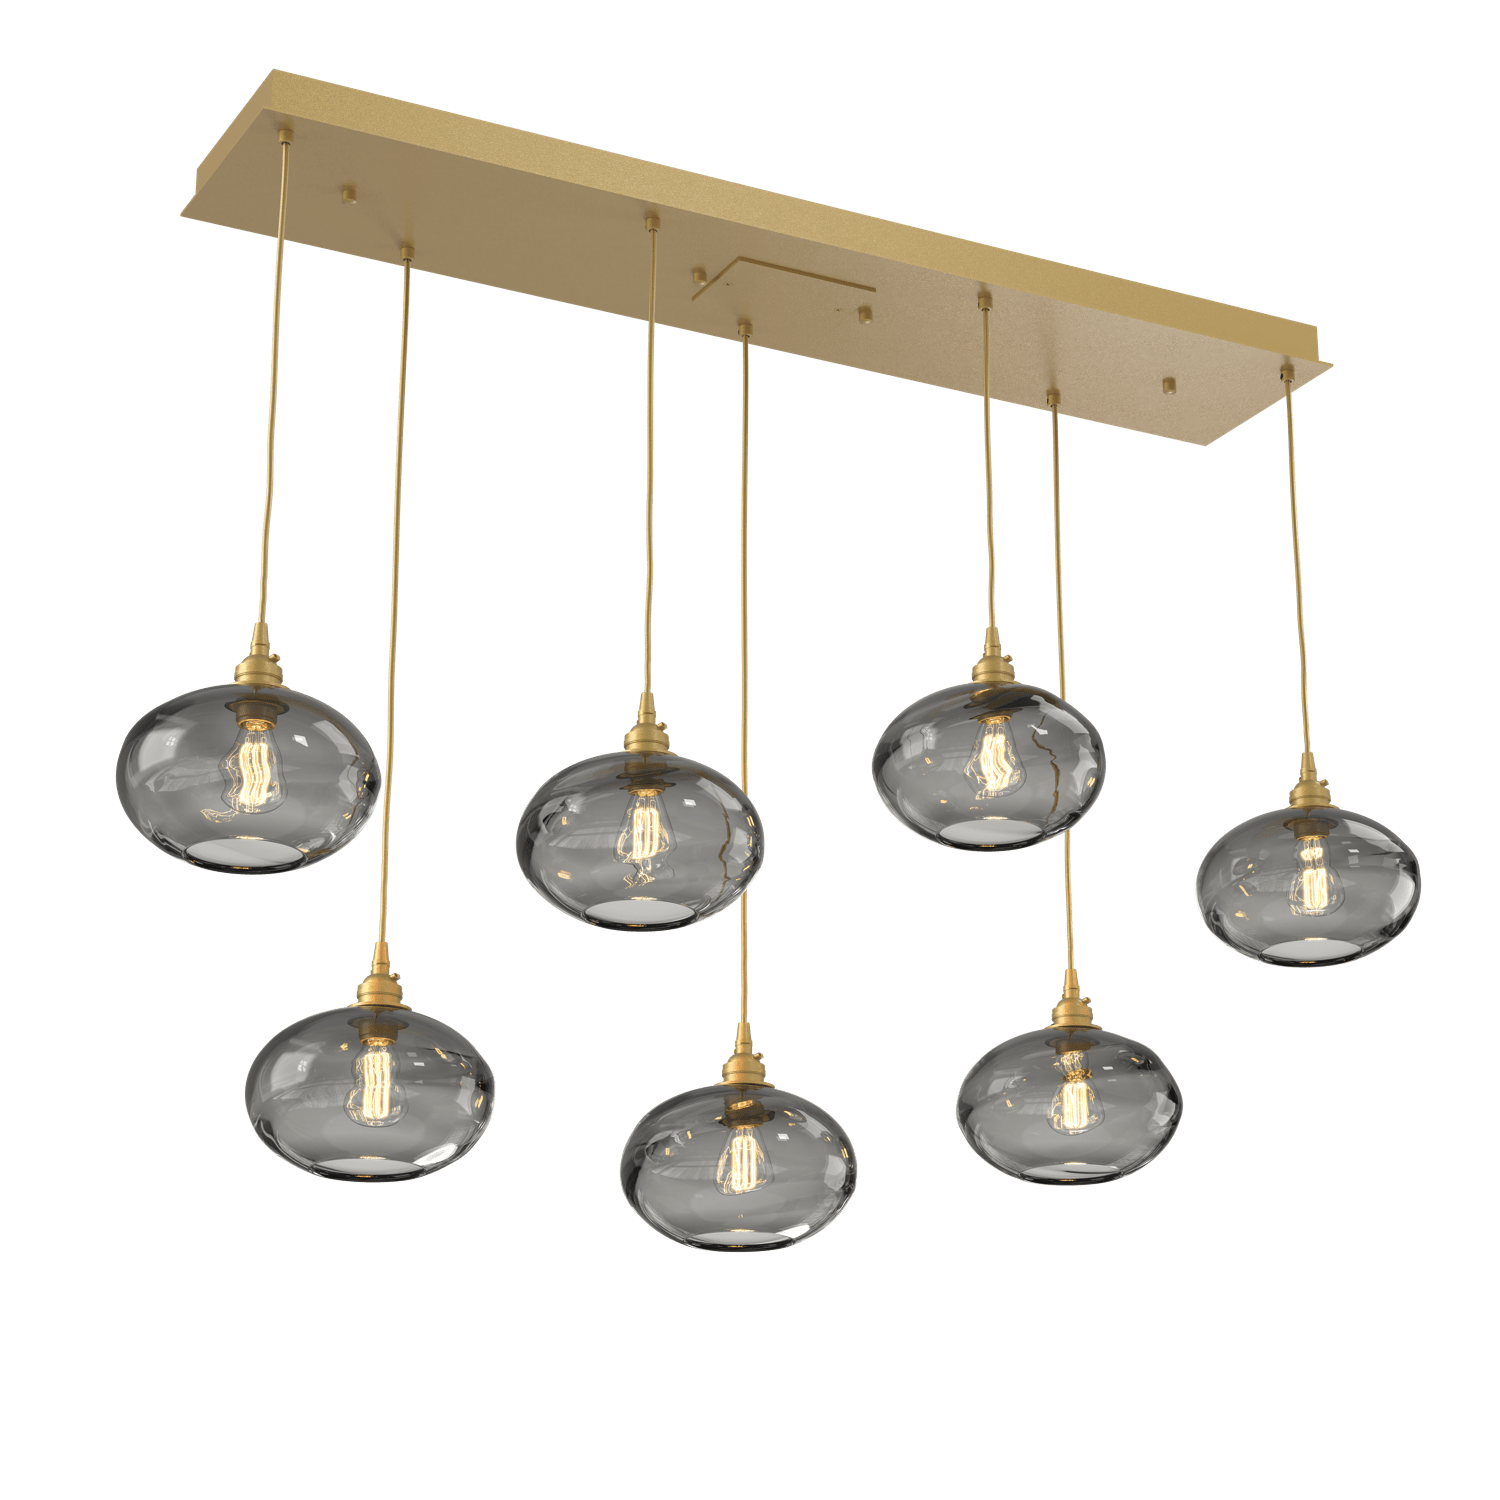 PLB0036-07-GB-OS-Hammerton-Studio-Optic-Blown-Glass-Coppa-7-light-linear-pendant-chandelier-with-gilded-brass-finish-and-optic-smoke-blown-glass-shades-and-incandescent-lamping